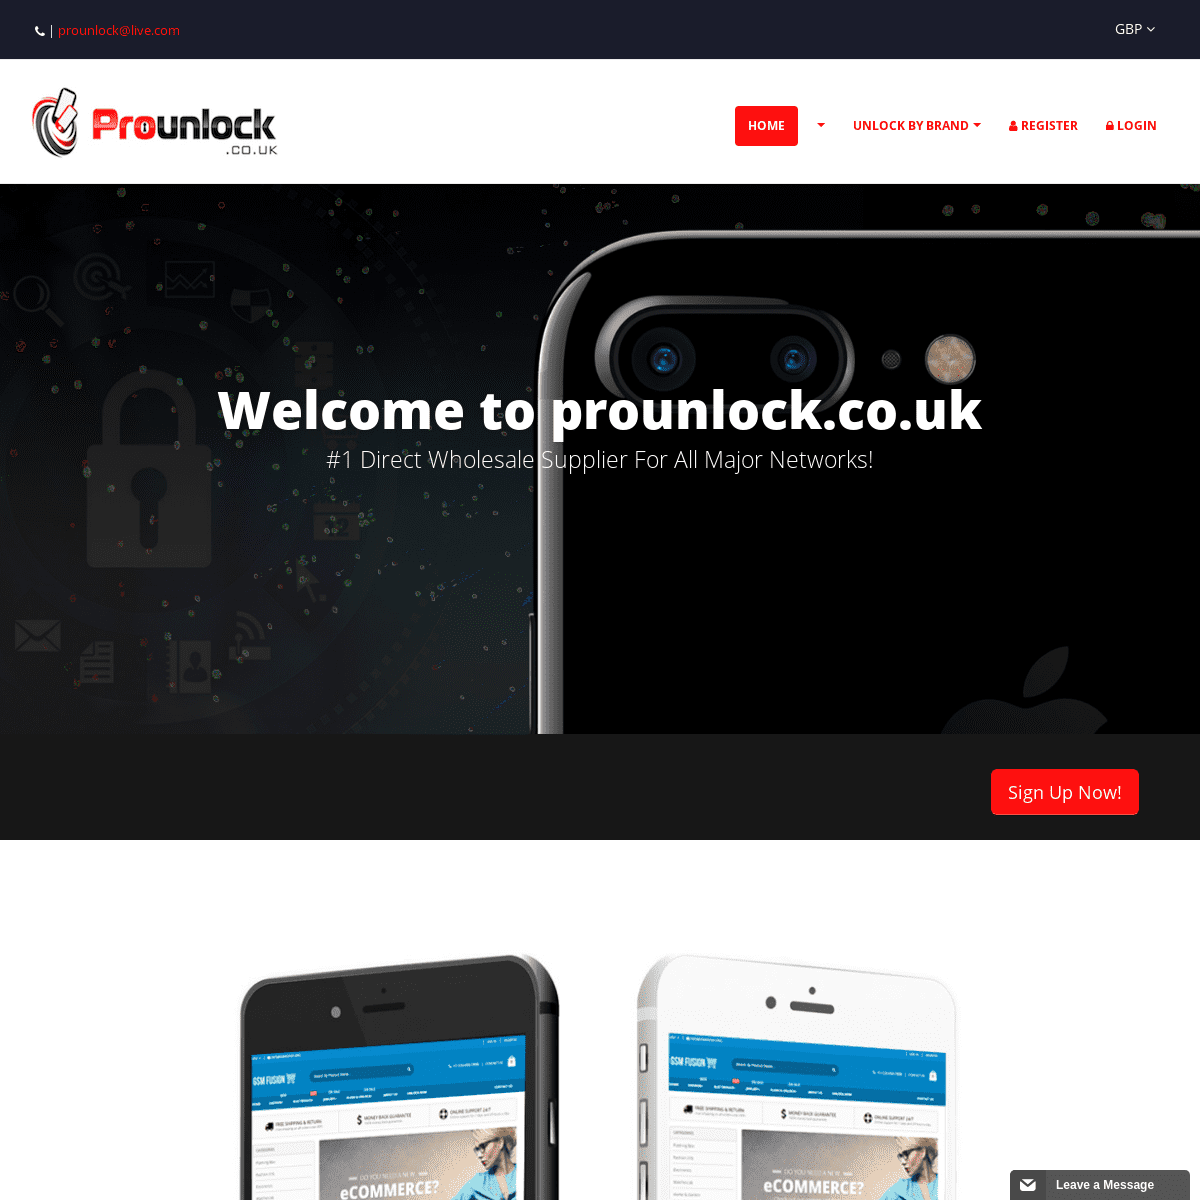 A complete backup of prounlock.co.uk